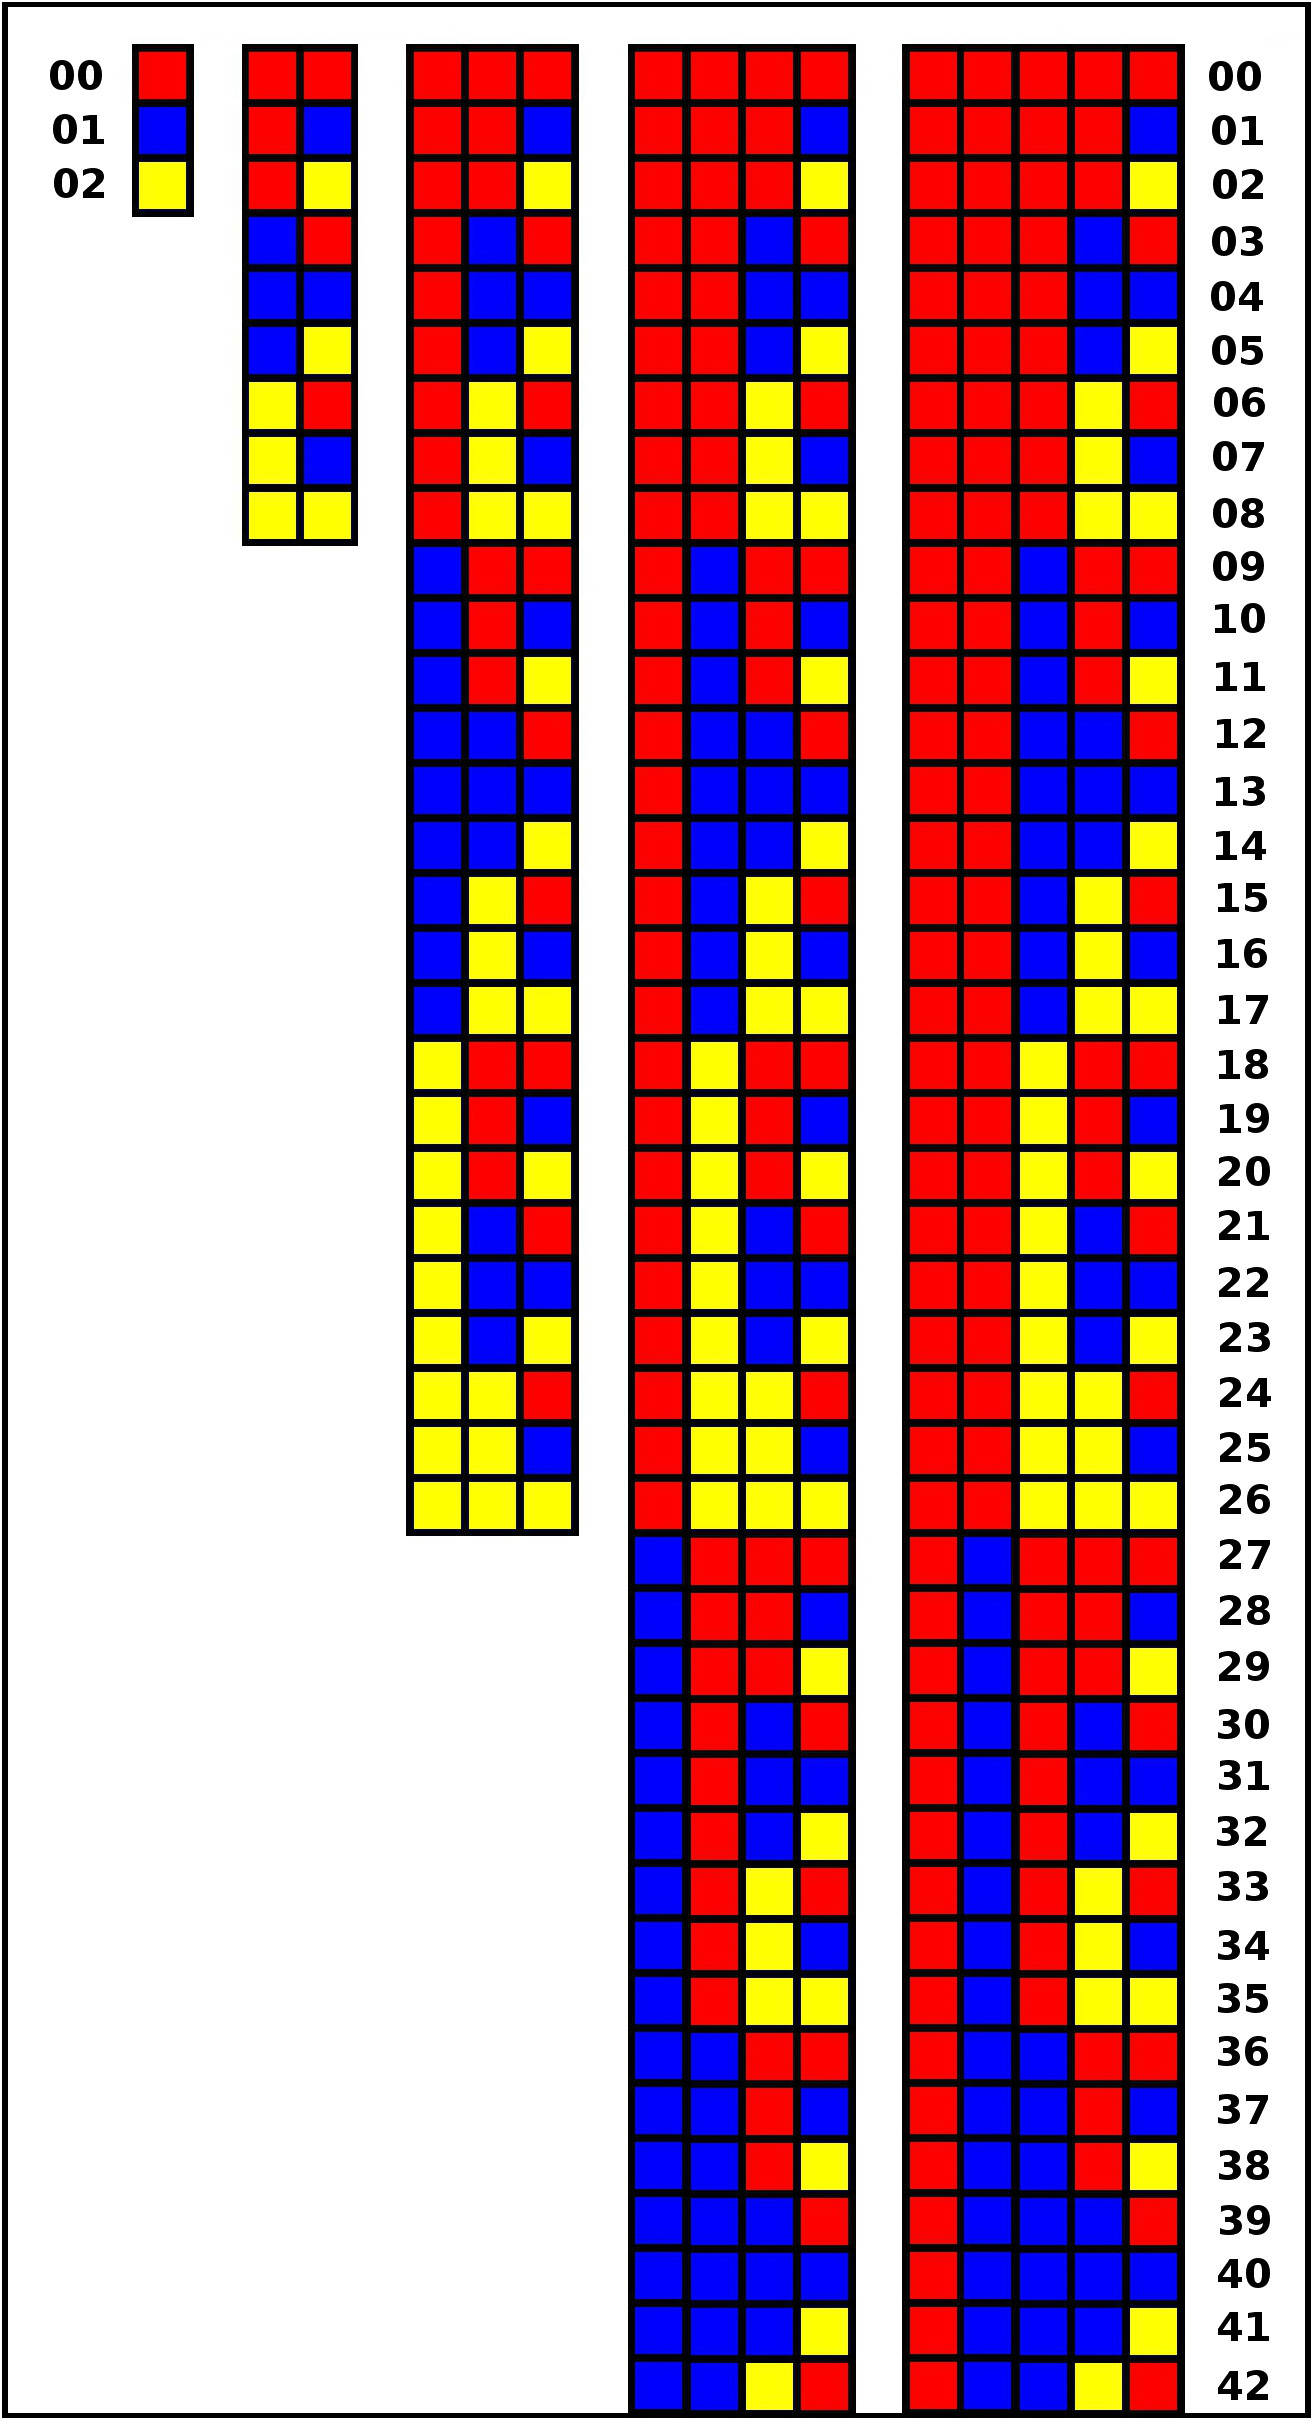 Visual Image of Base 3 Numbers